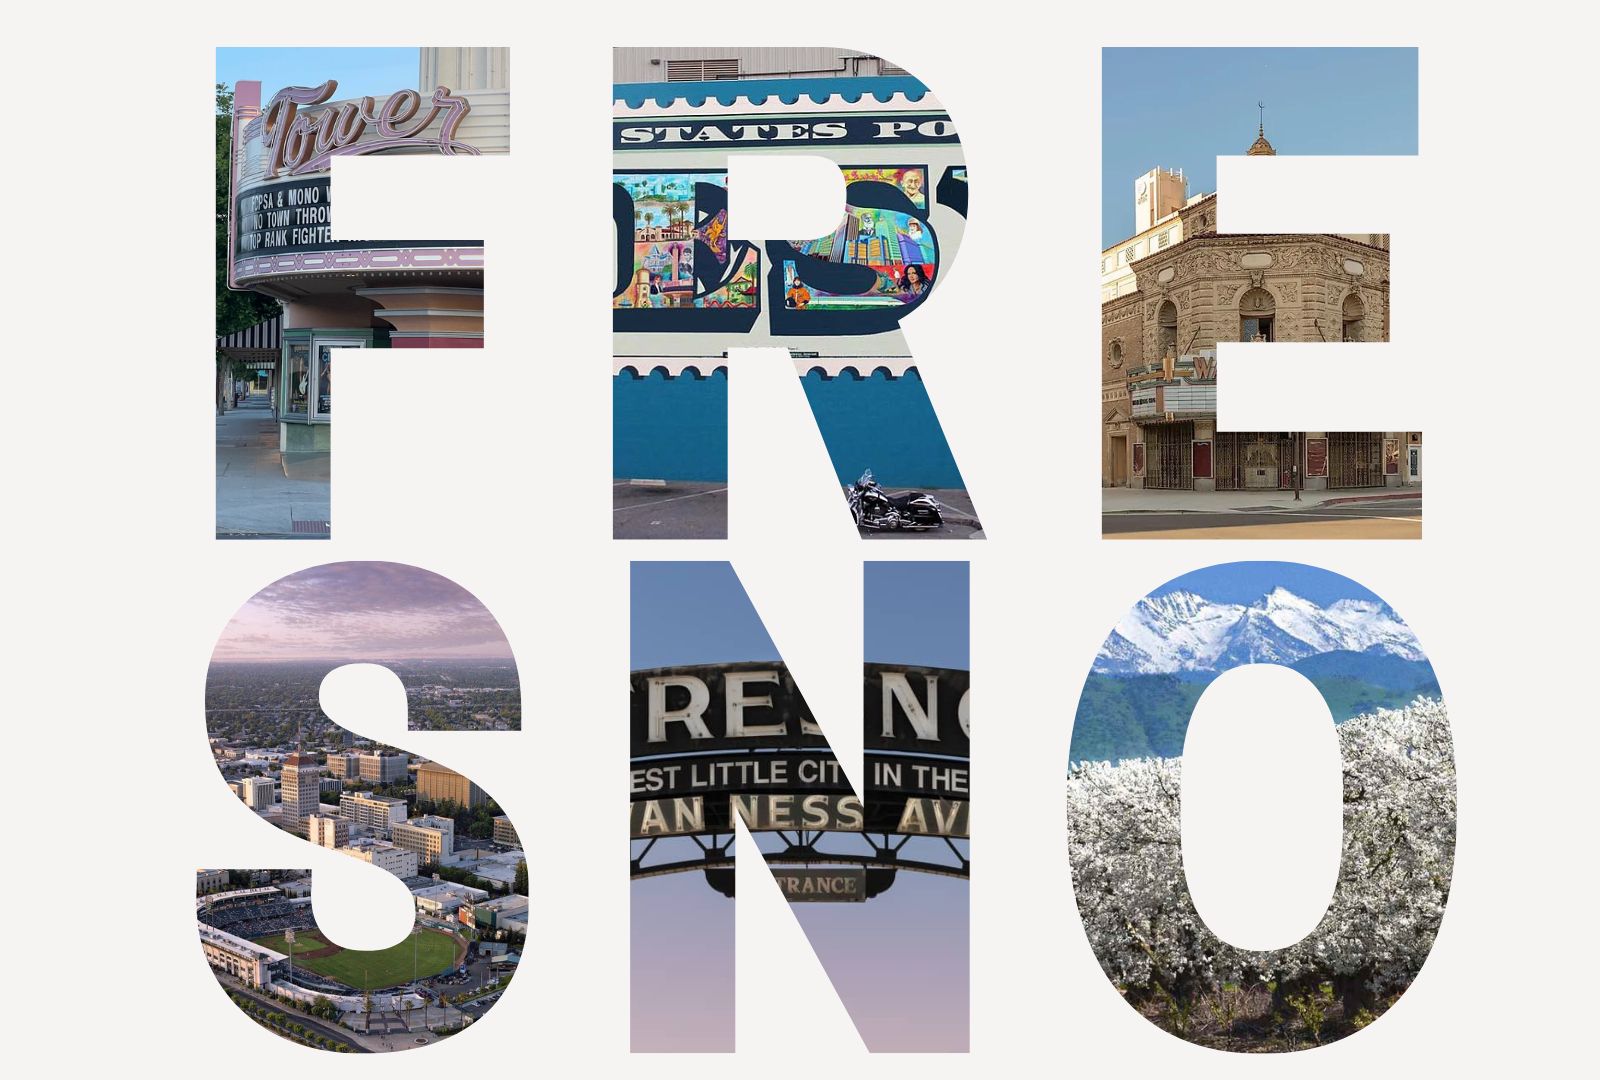 collage of 6 photographs arranged to form the phrase “FRESNO"